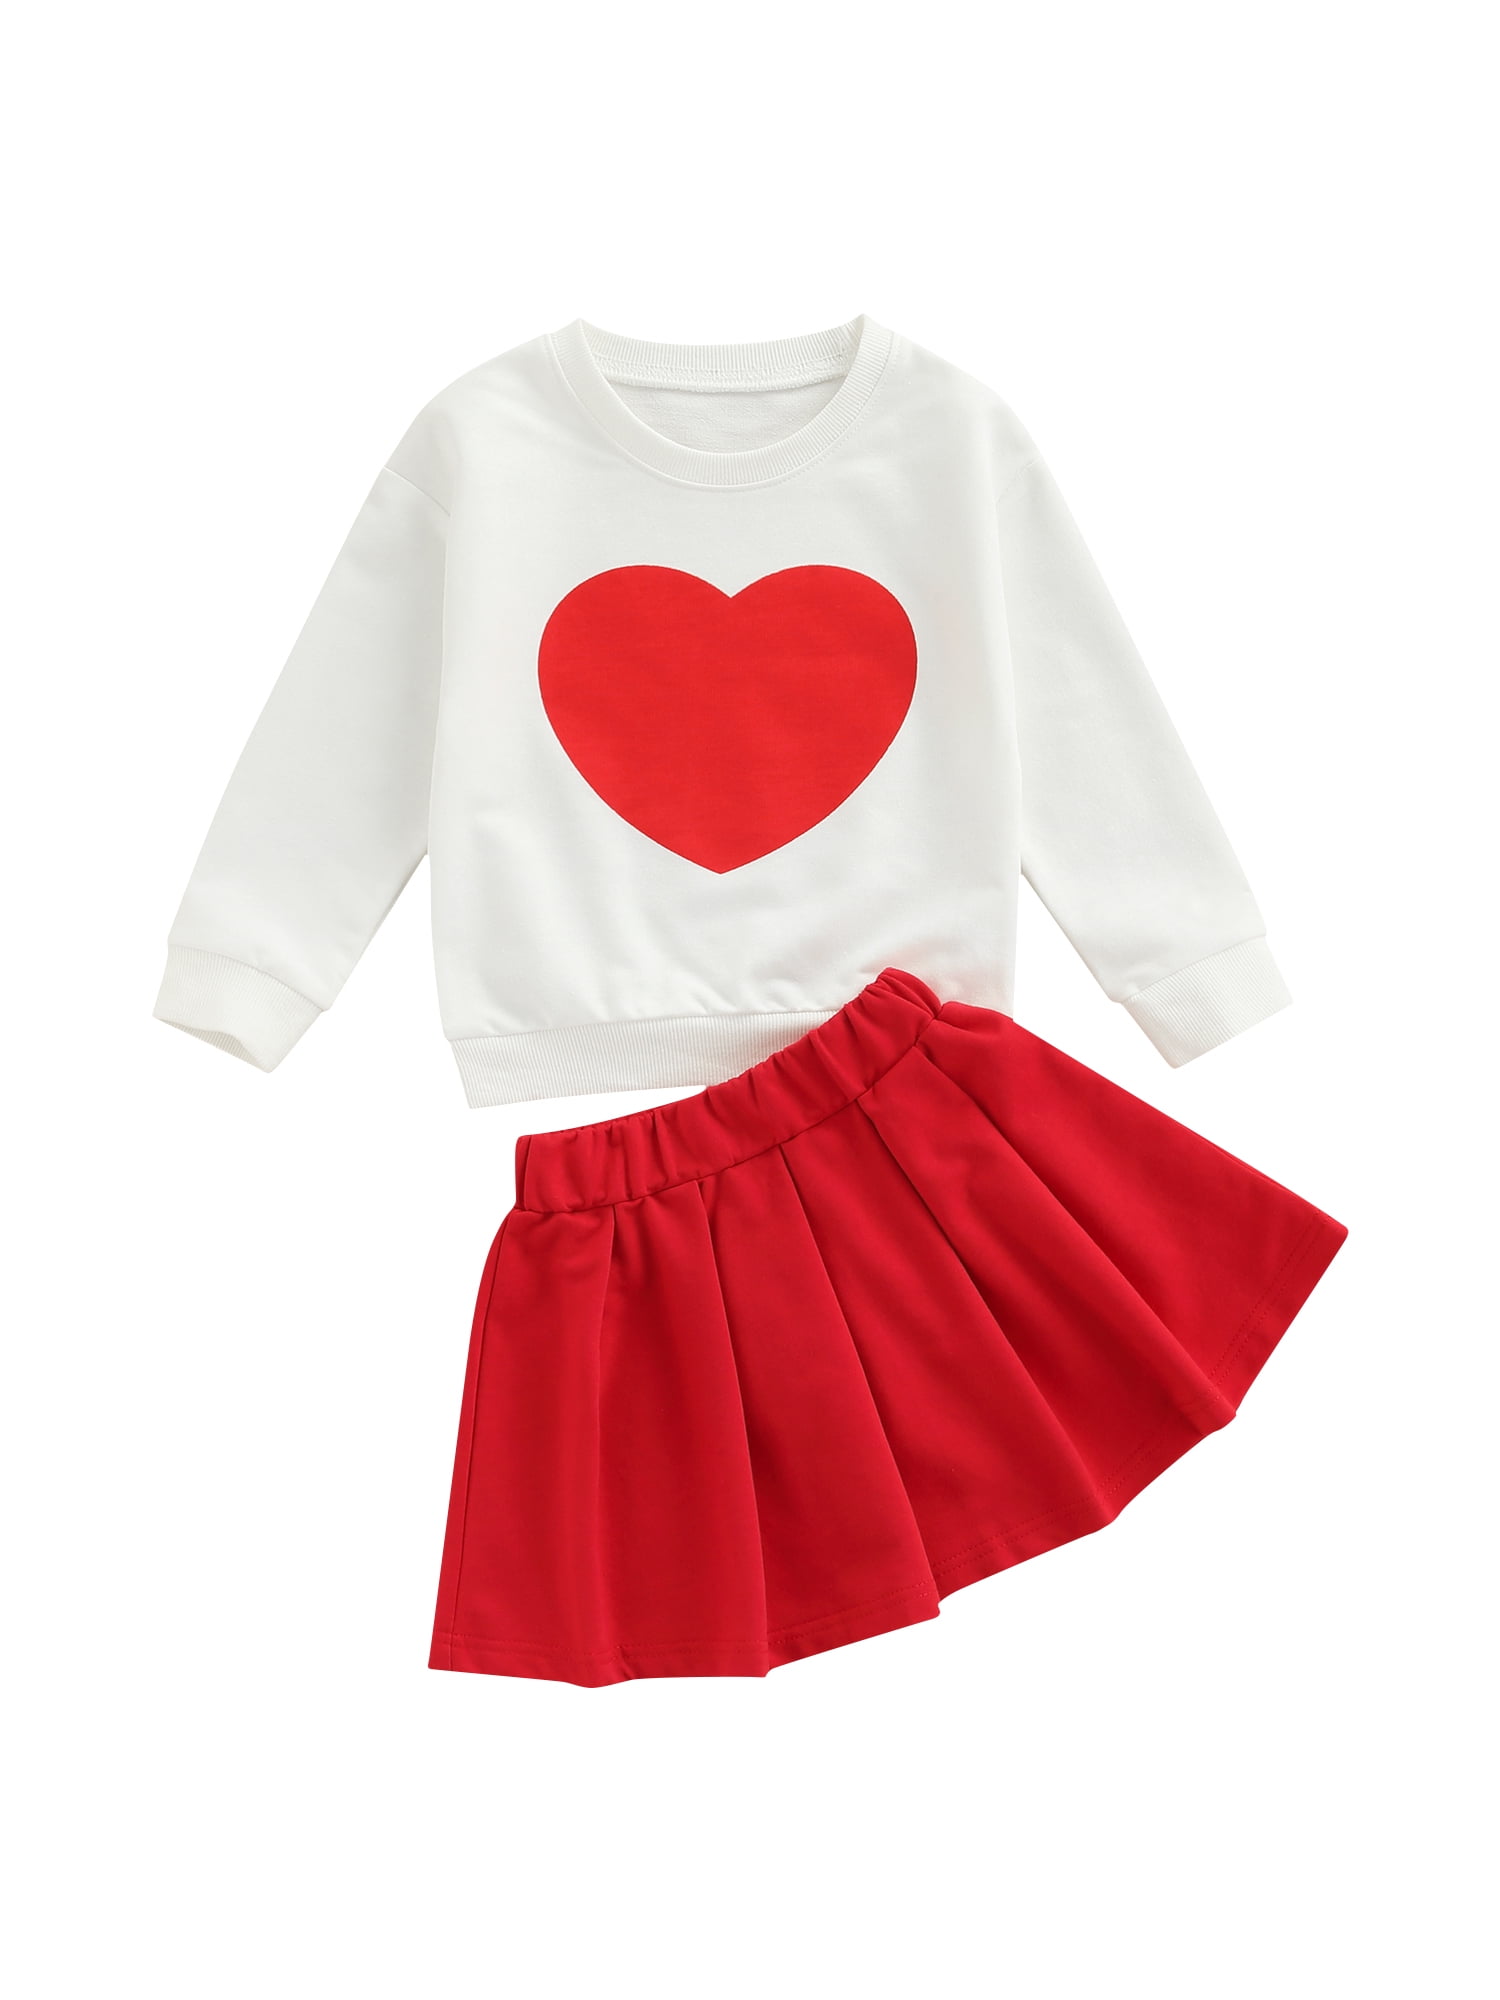  Cute Toddler Girls 2 Piece Outfits - Valentines Long